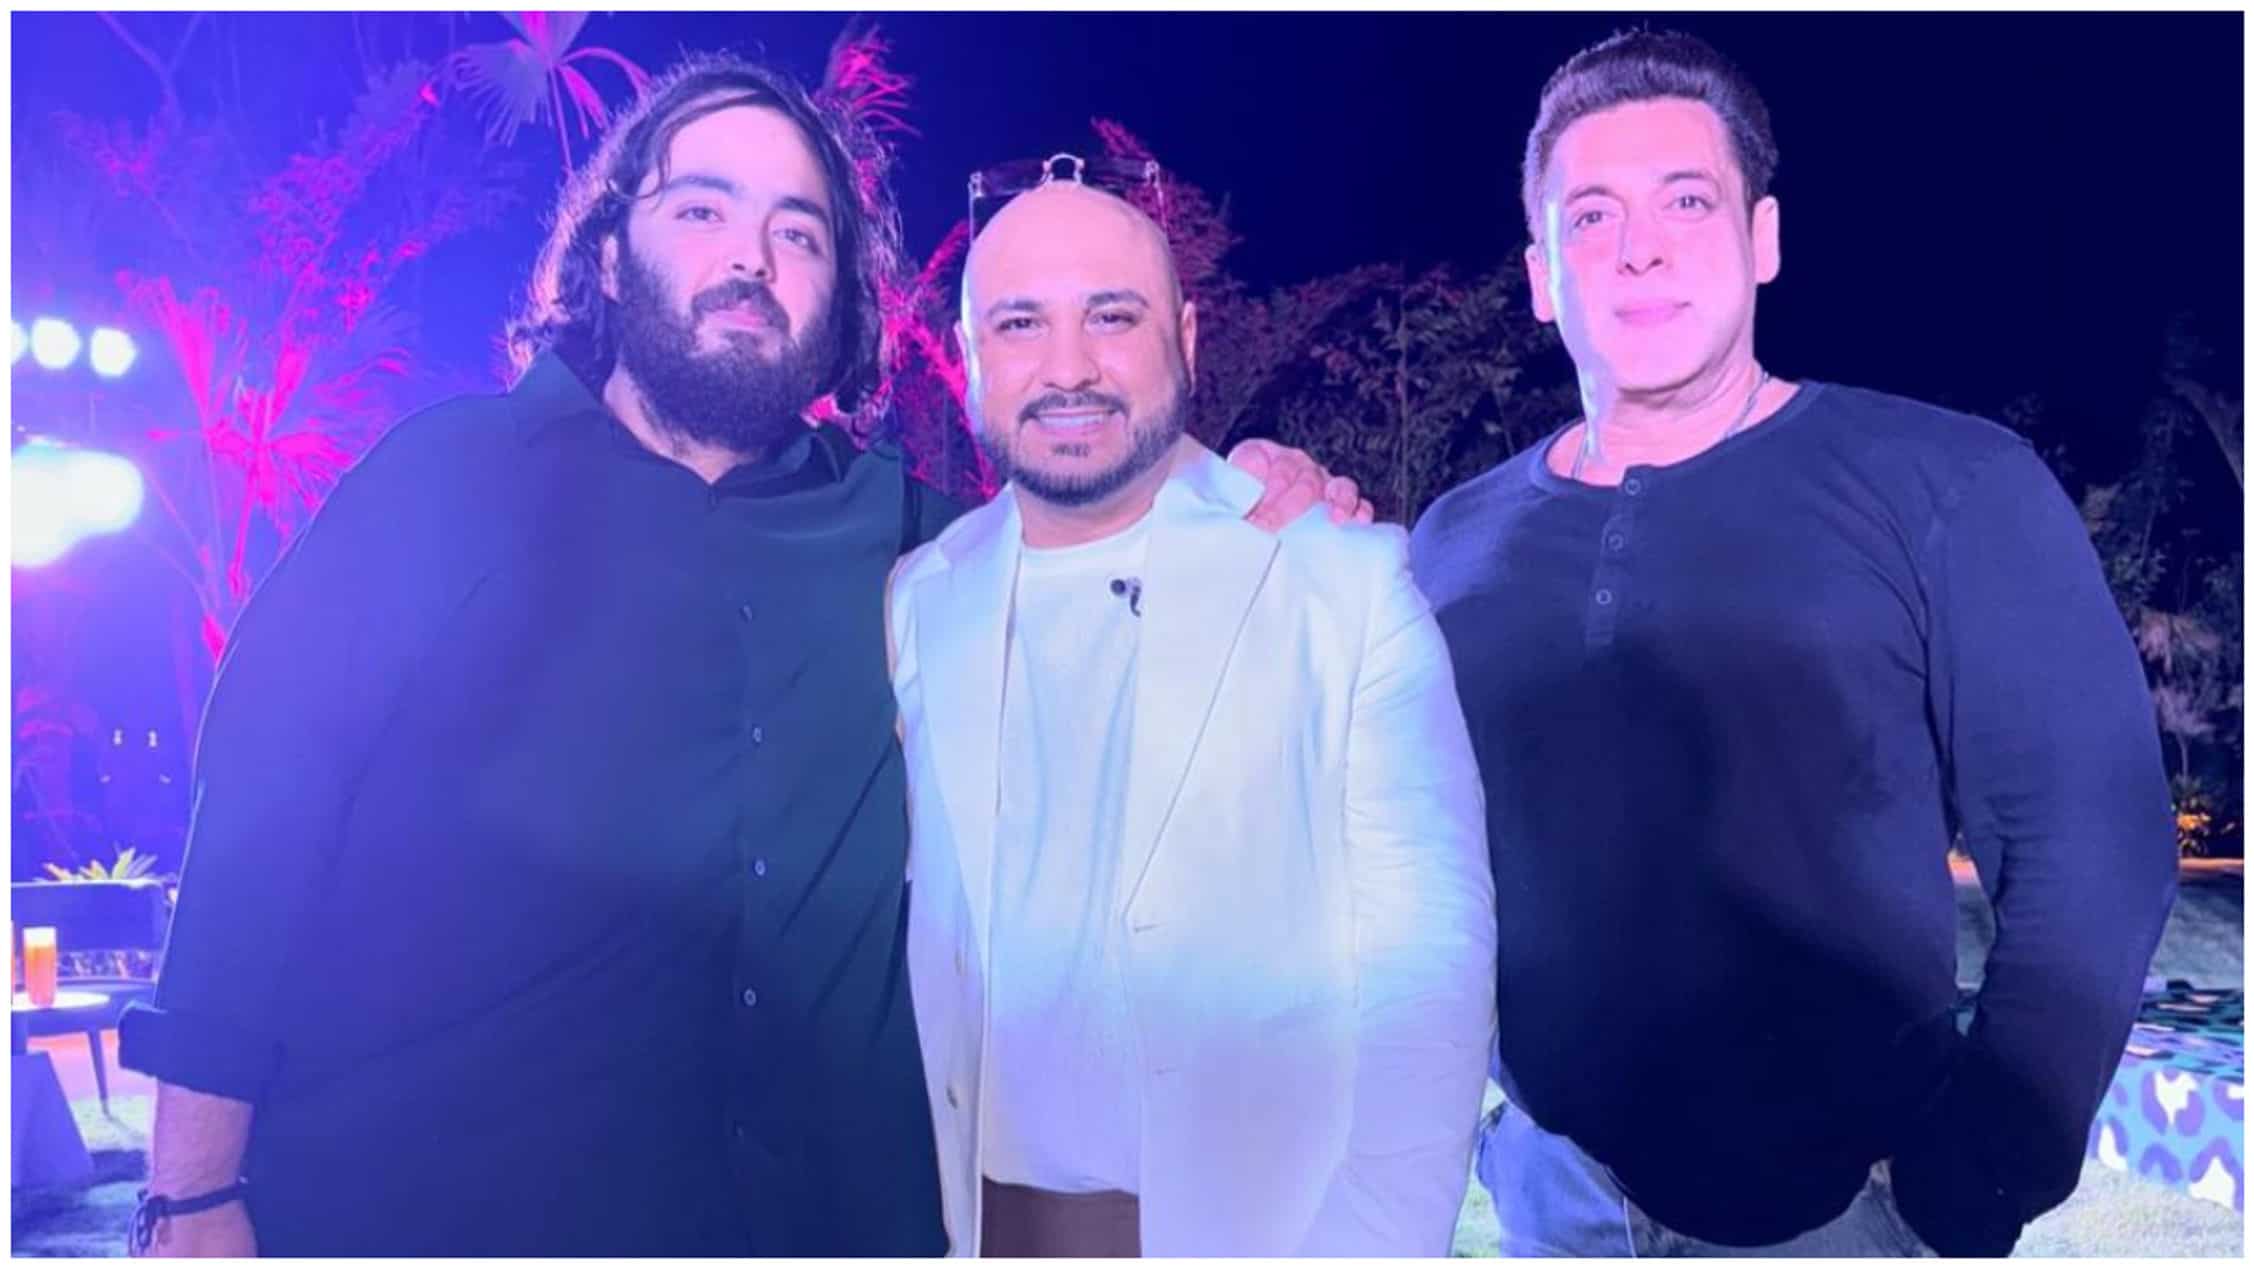 https://www.mobilemasala.com/film-gossip/Anant-Ambani-birthday-bash-Salman-Khan-sings-a-song-from-Animal-with-B-Praak-can-you-guess-which-one-i252483